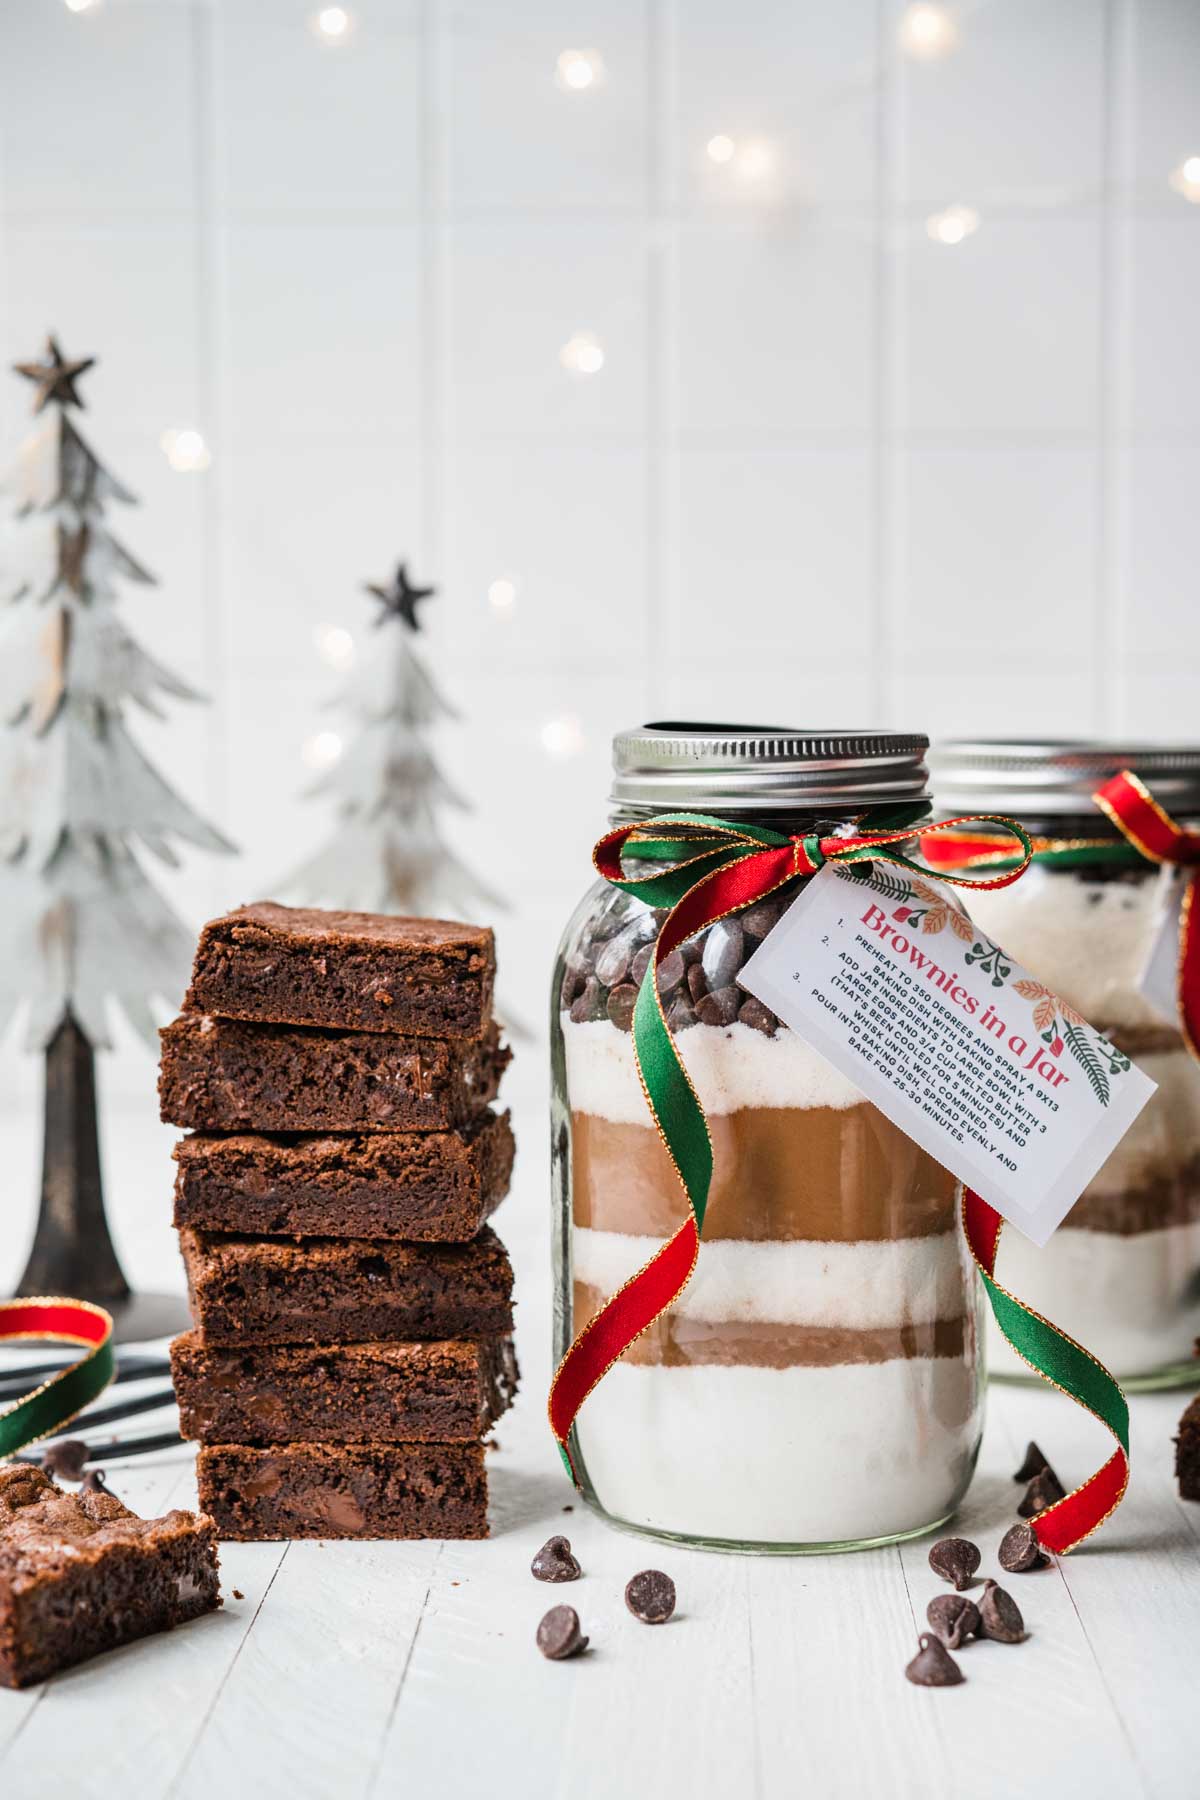 Brownies in a Jar with layered ingredients next to finished baked brownies